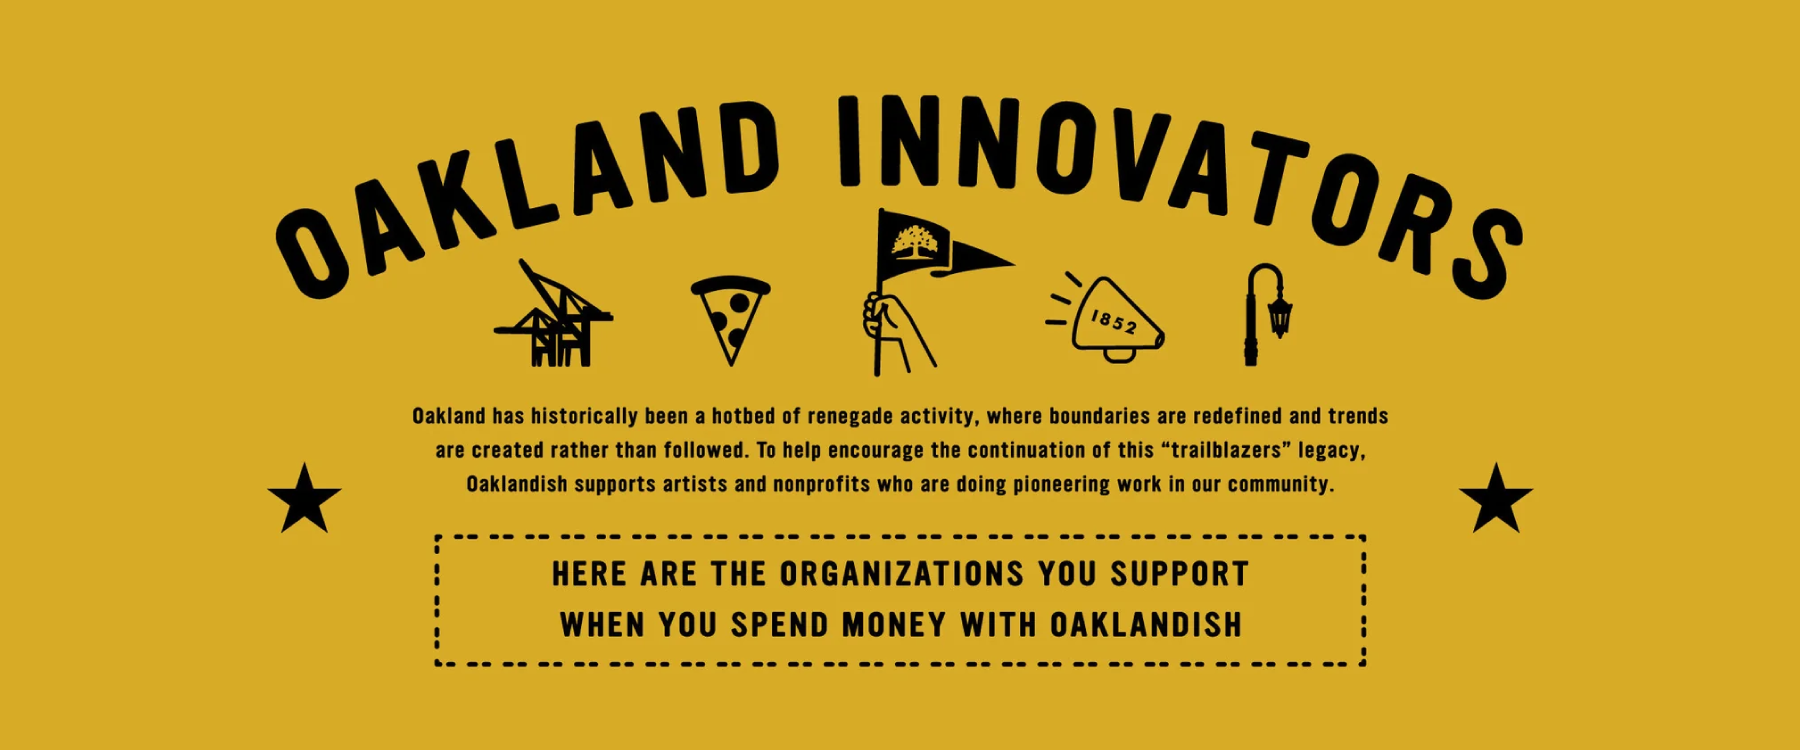 Oakland innovators banner image. Here are the orgs you support when you shop with us.